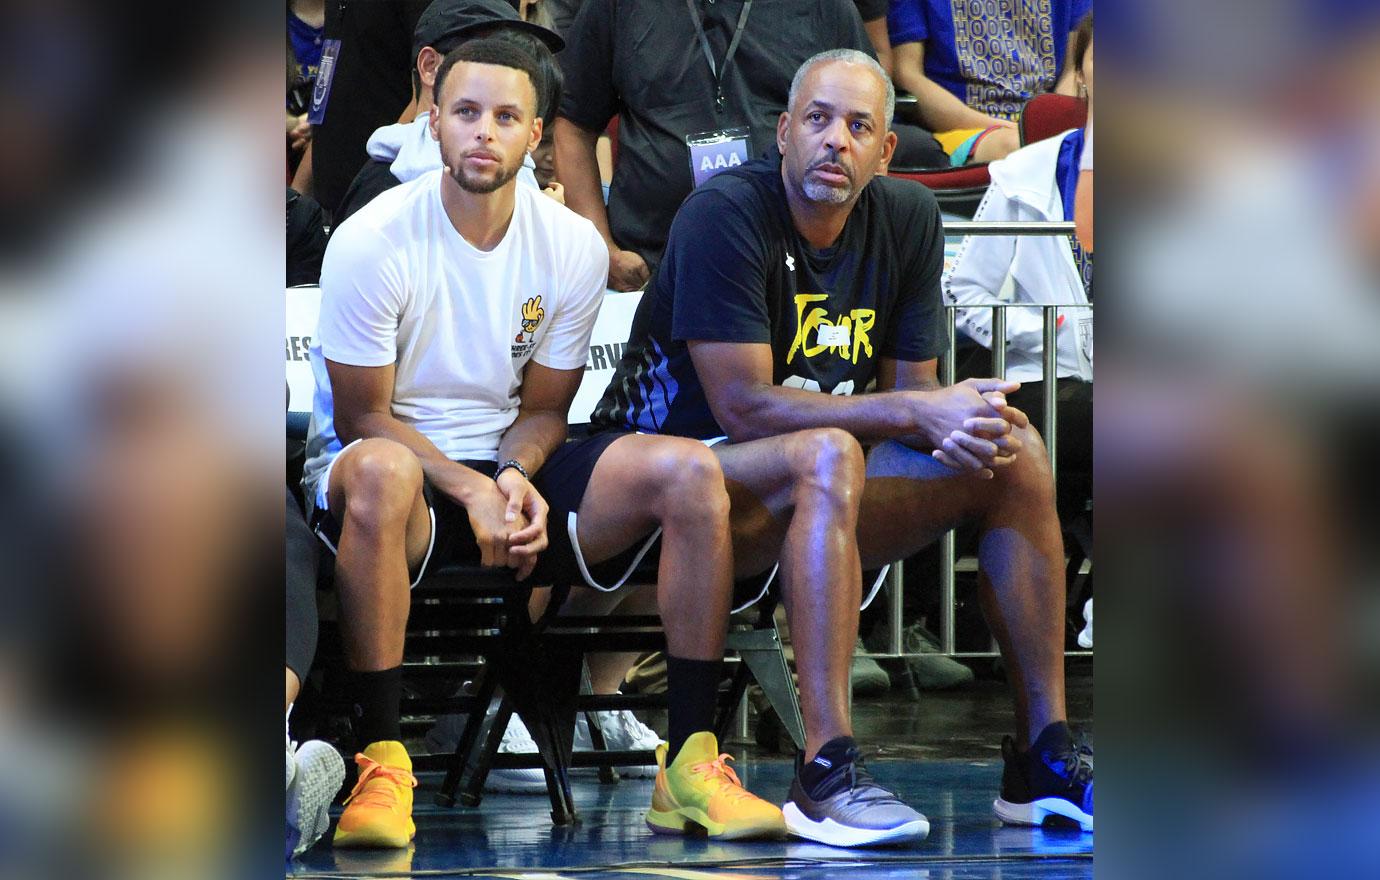 Steph Curry's Mom Files For Divorce After 33 Years Of Marriage